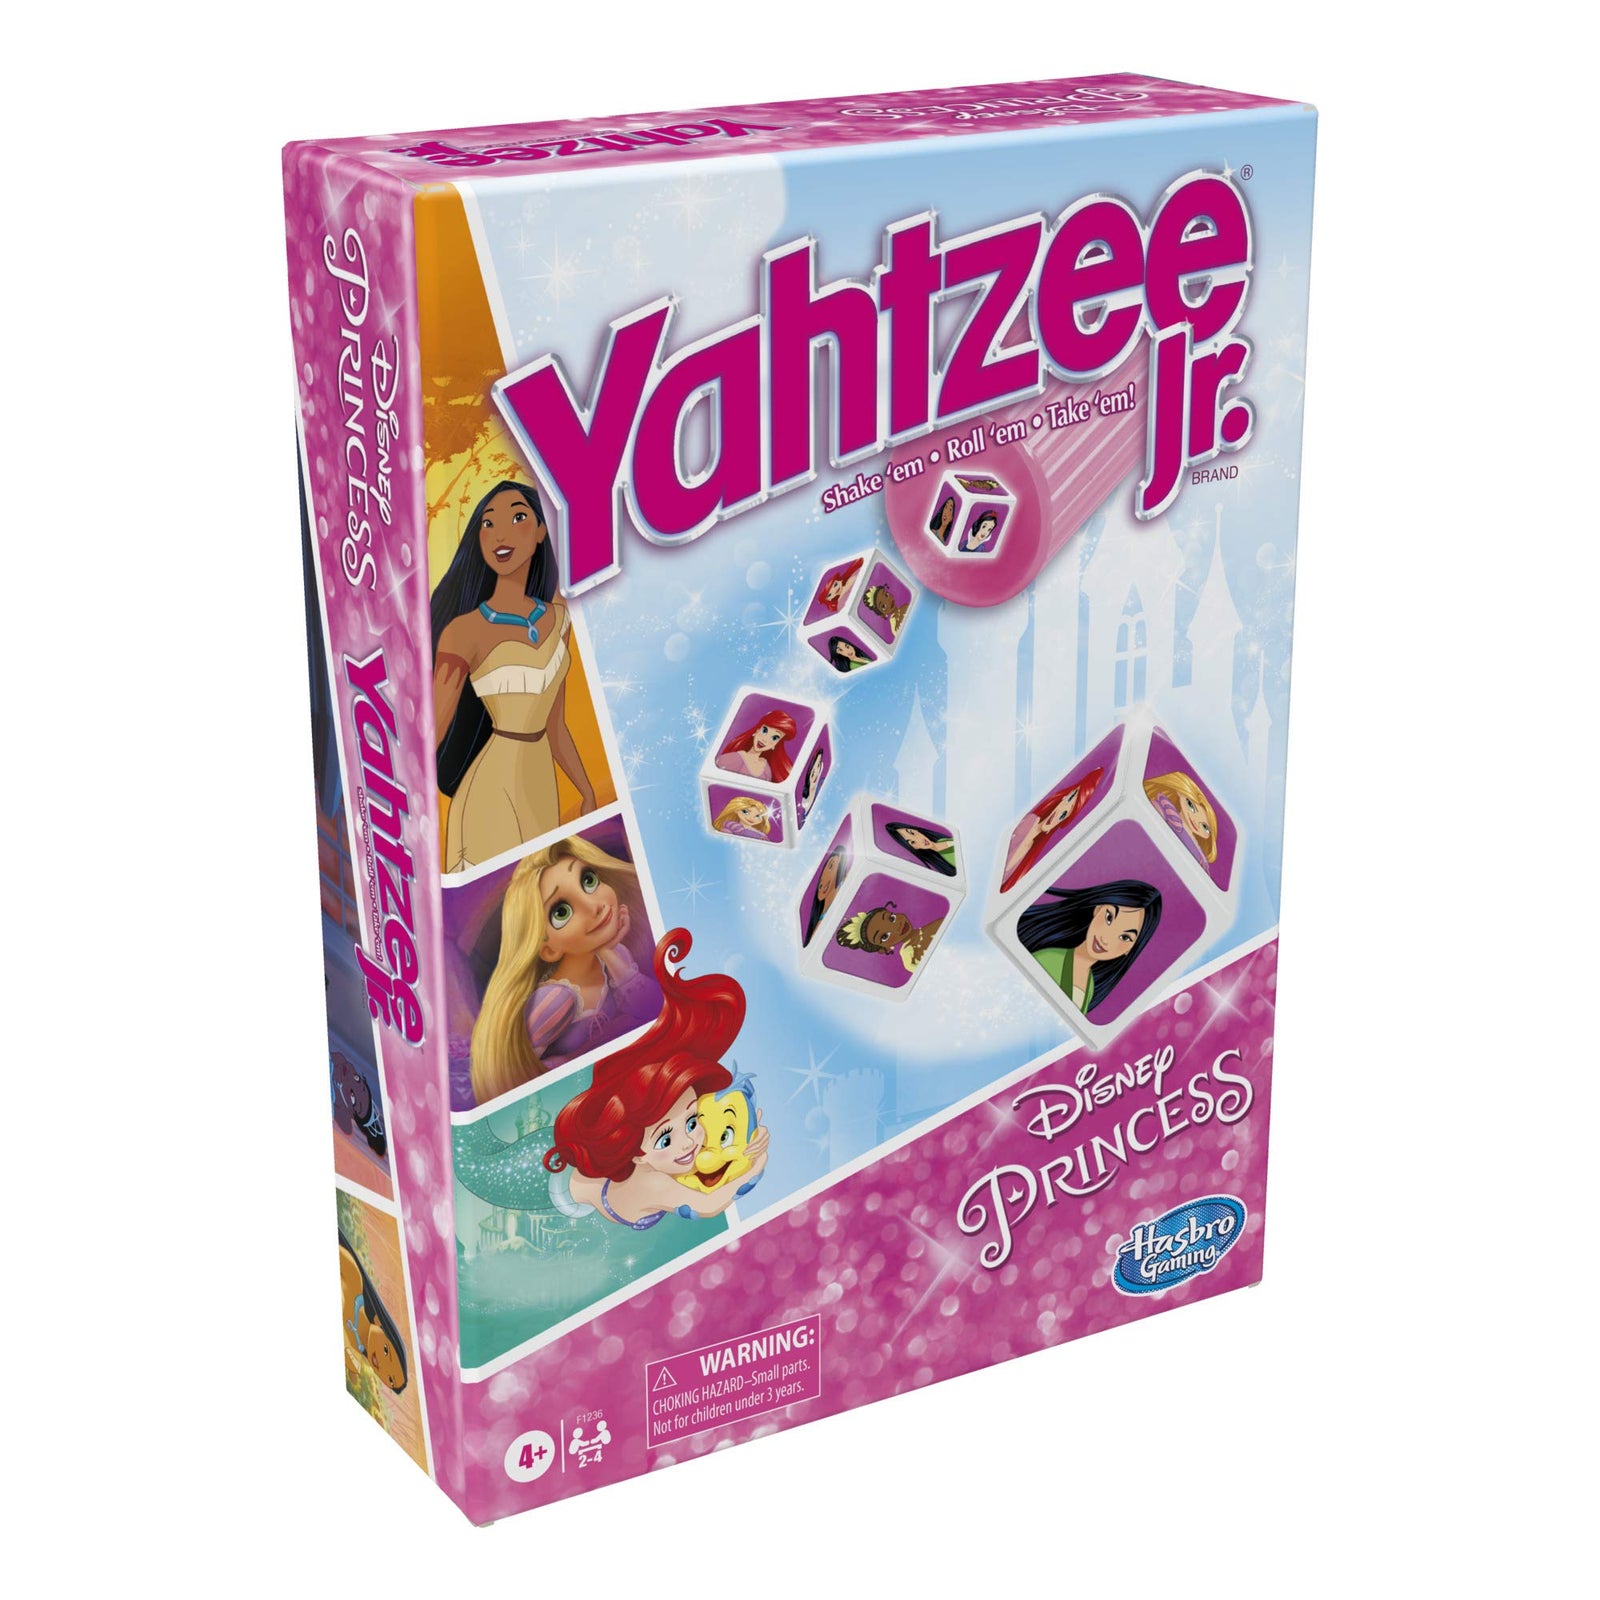 Hasbro Gaming Yahtzee Jr.: Disney Princess Edition Board Game for Kids Ages 4 and Up, for 2-4 Players, Counting and Matching Game for Preschoolers (Amazon Exclusive)